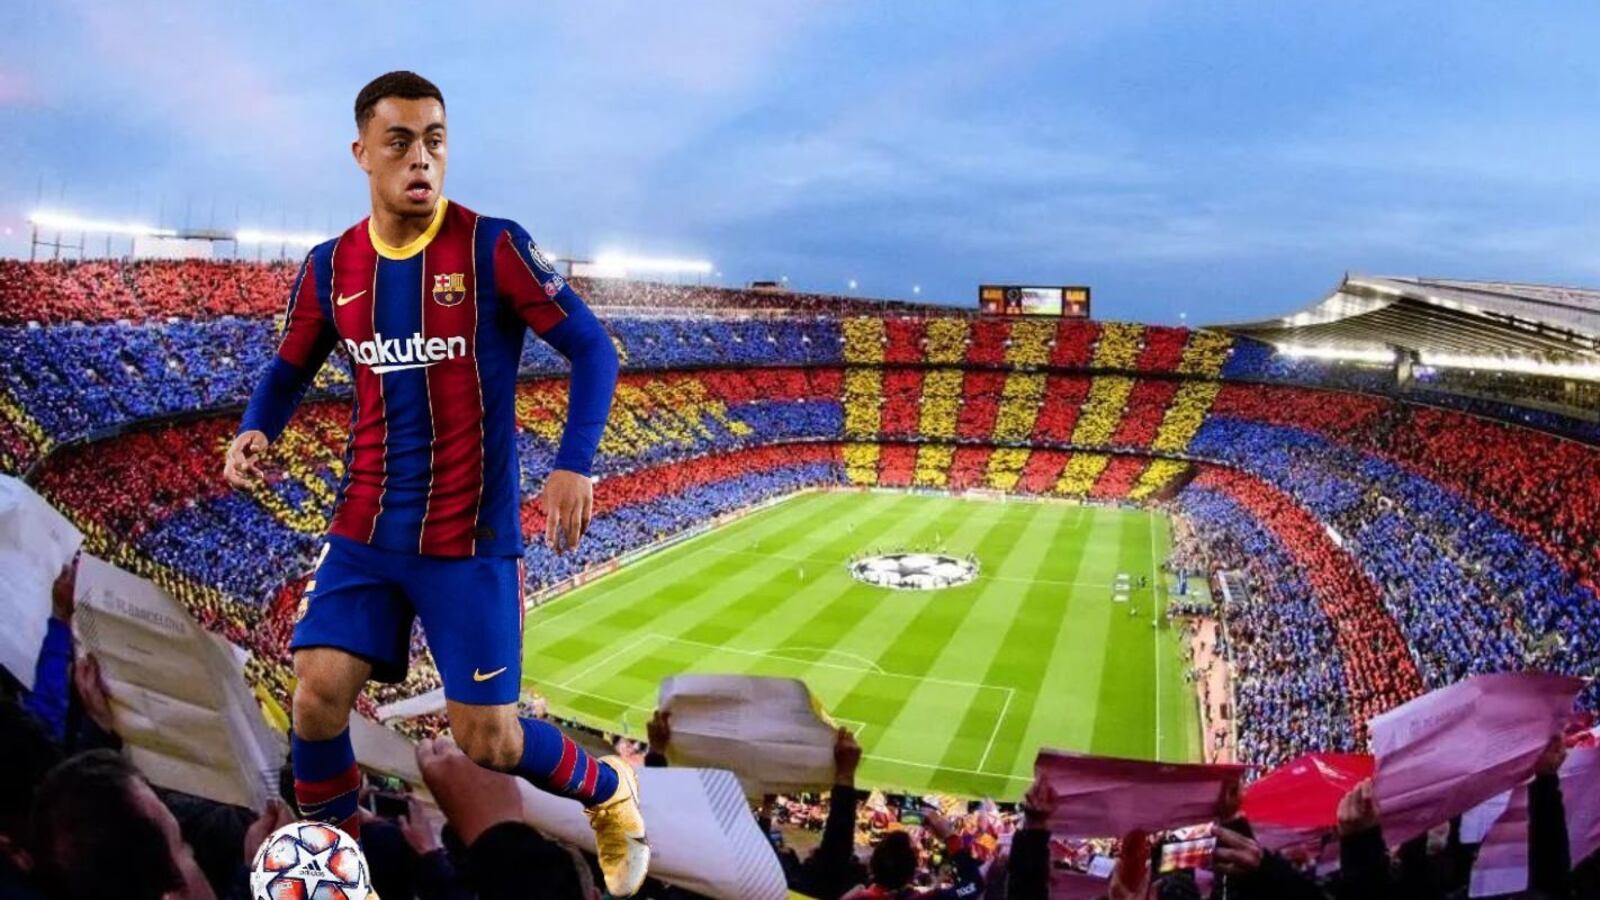 The two clubs looking to sign Sergiño Dest after his poor performance with FC Barcelona